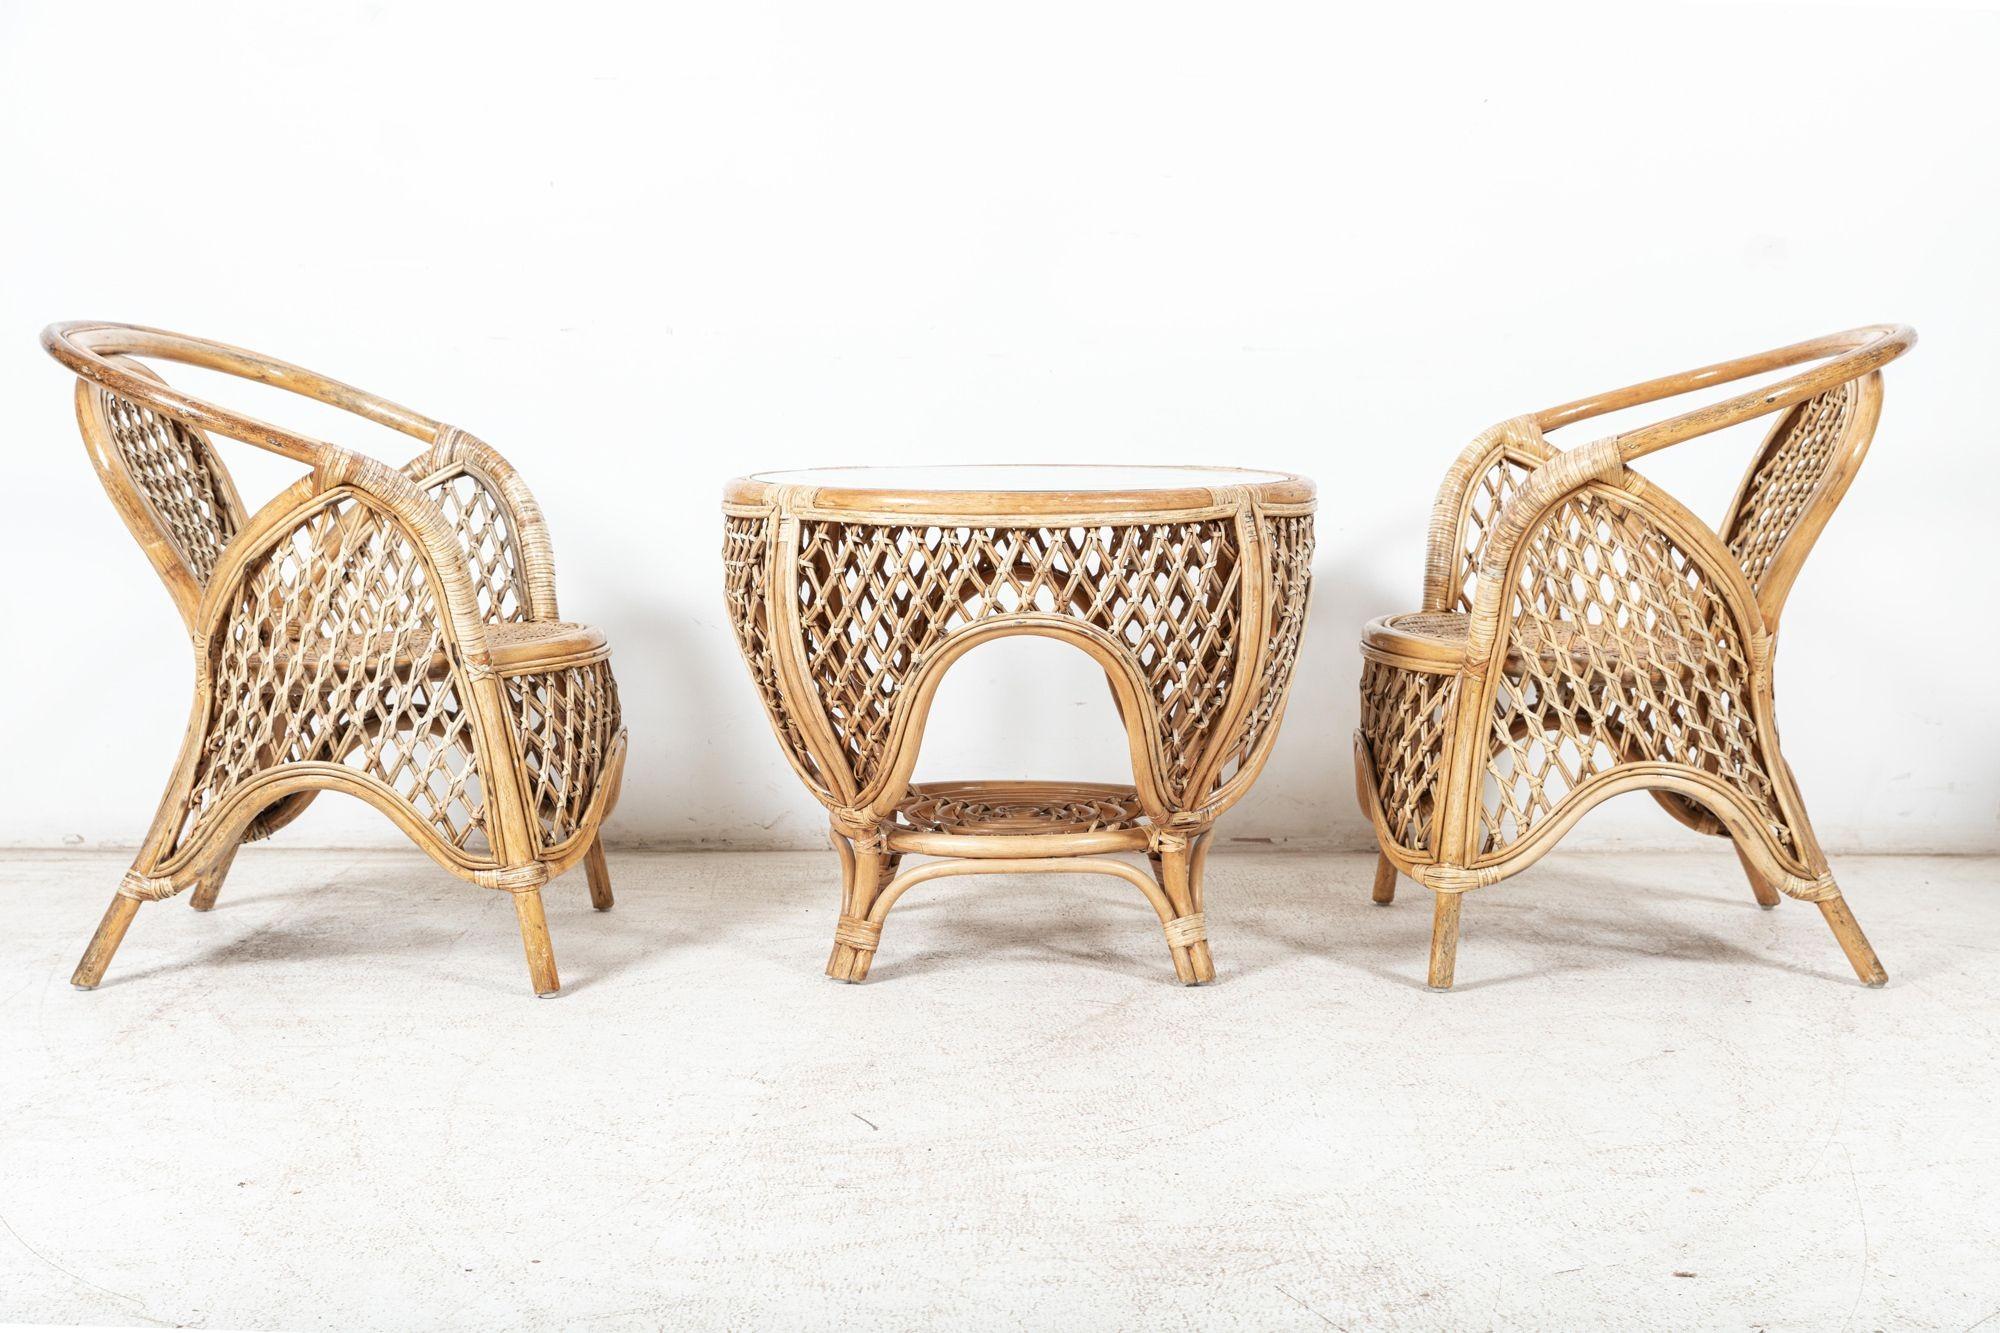 Circa 1950’s

Mid century English Cane/Wicker conservatory set. x4 Armchairs and matching table.

Great form

Price for the set

Table W74 x D74 x H61 cm
Chairs W71 x D60 x H80 cm.

 